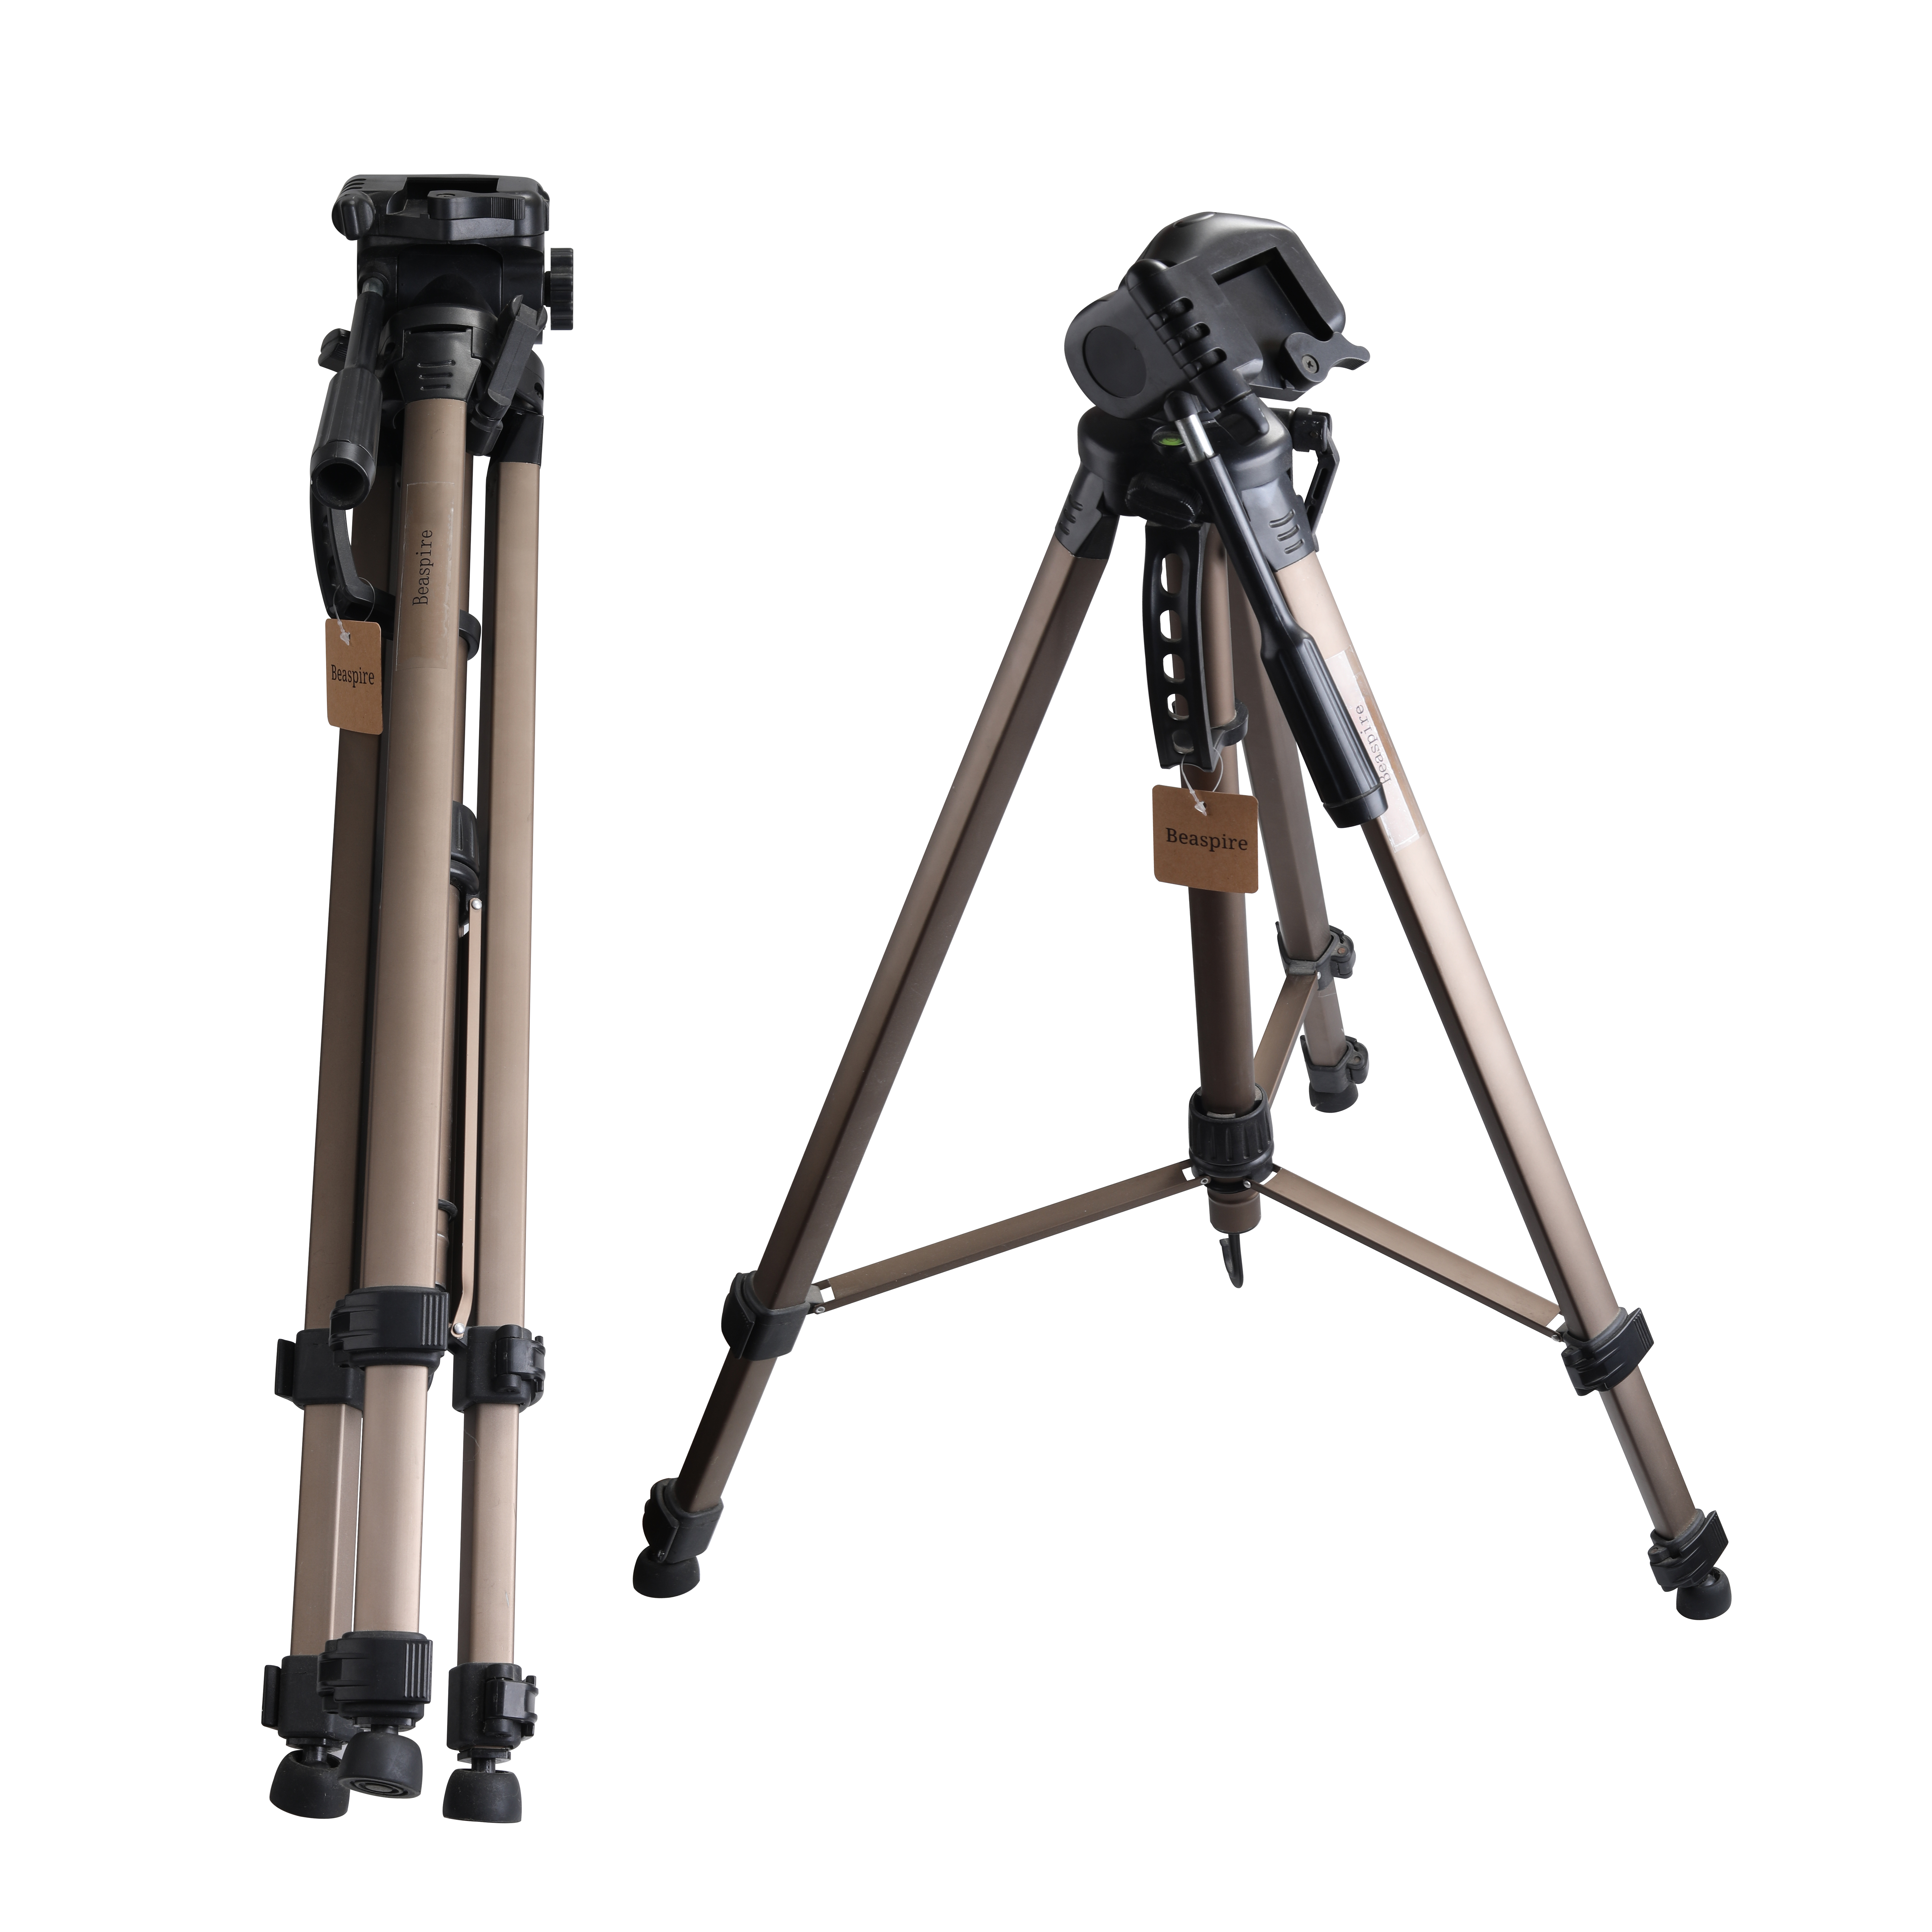 Beaspire WT-3540 camera tripod SLR bracket indoor and outdoor can be used, easy storage.